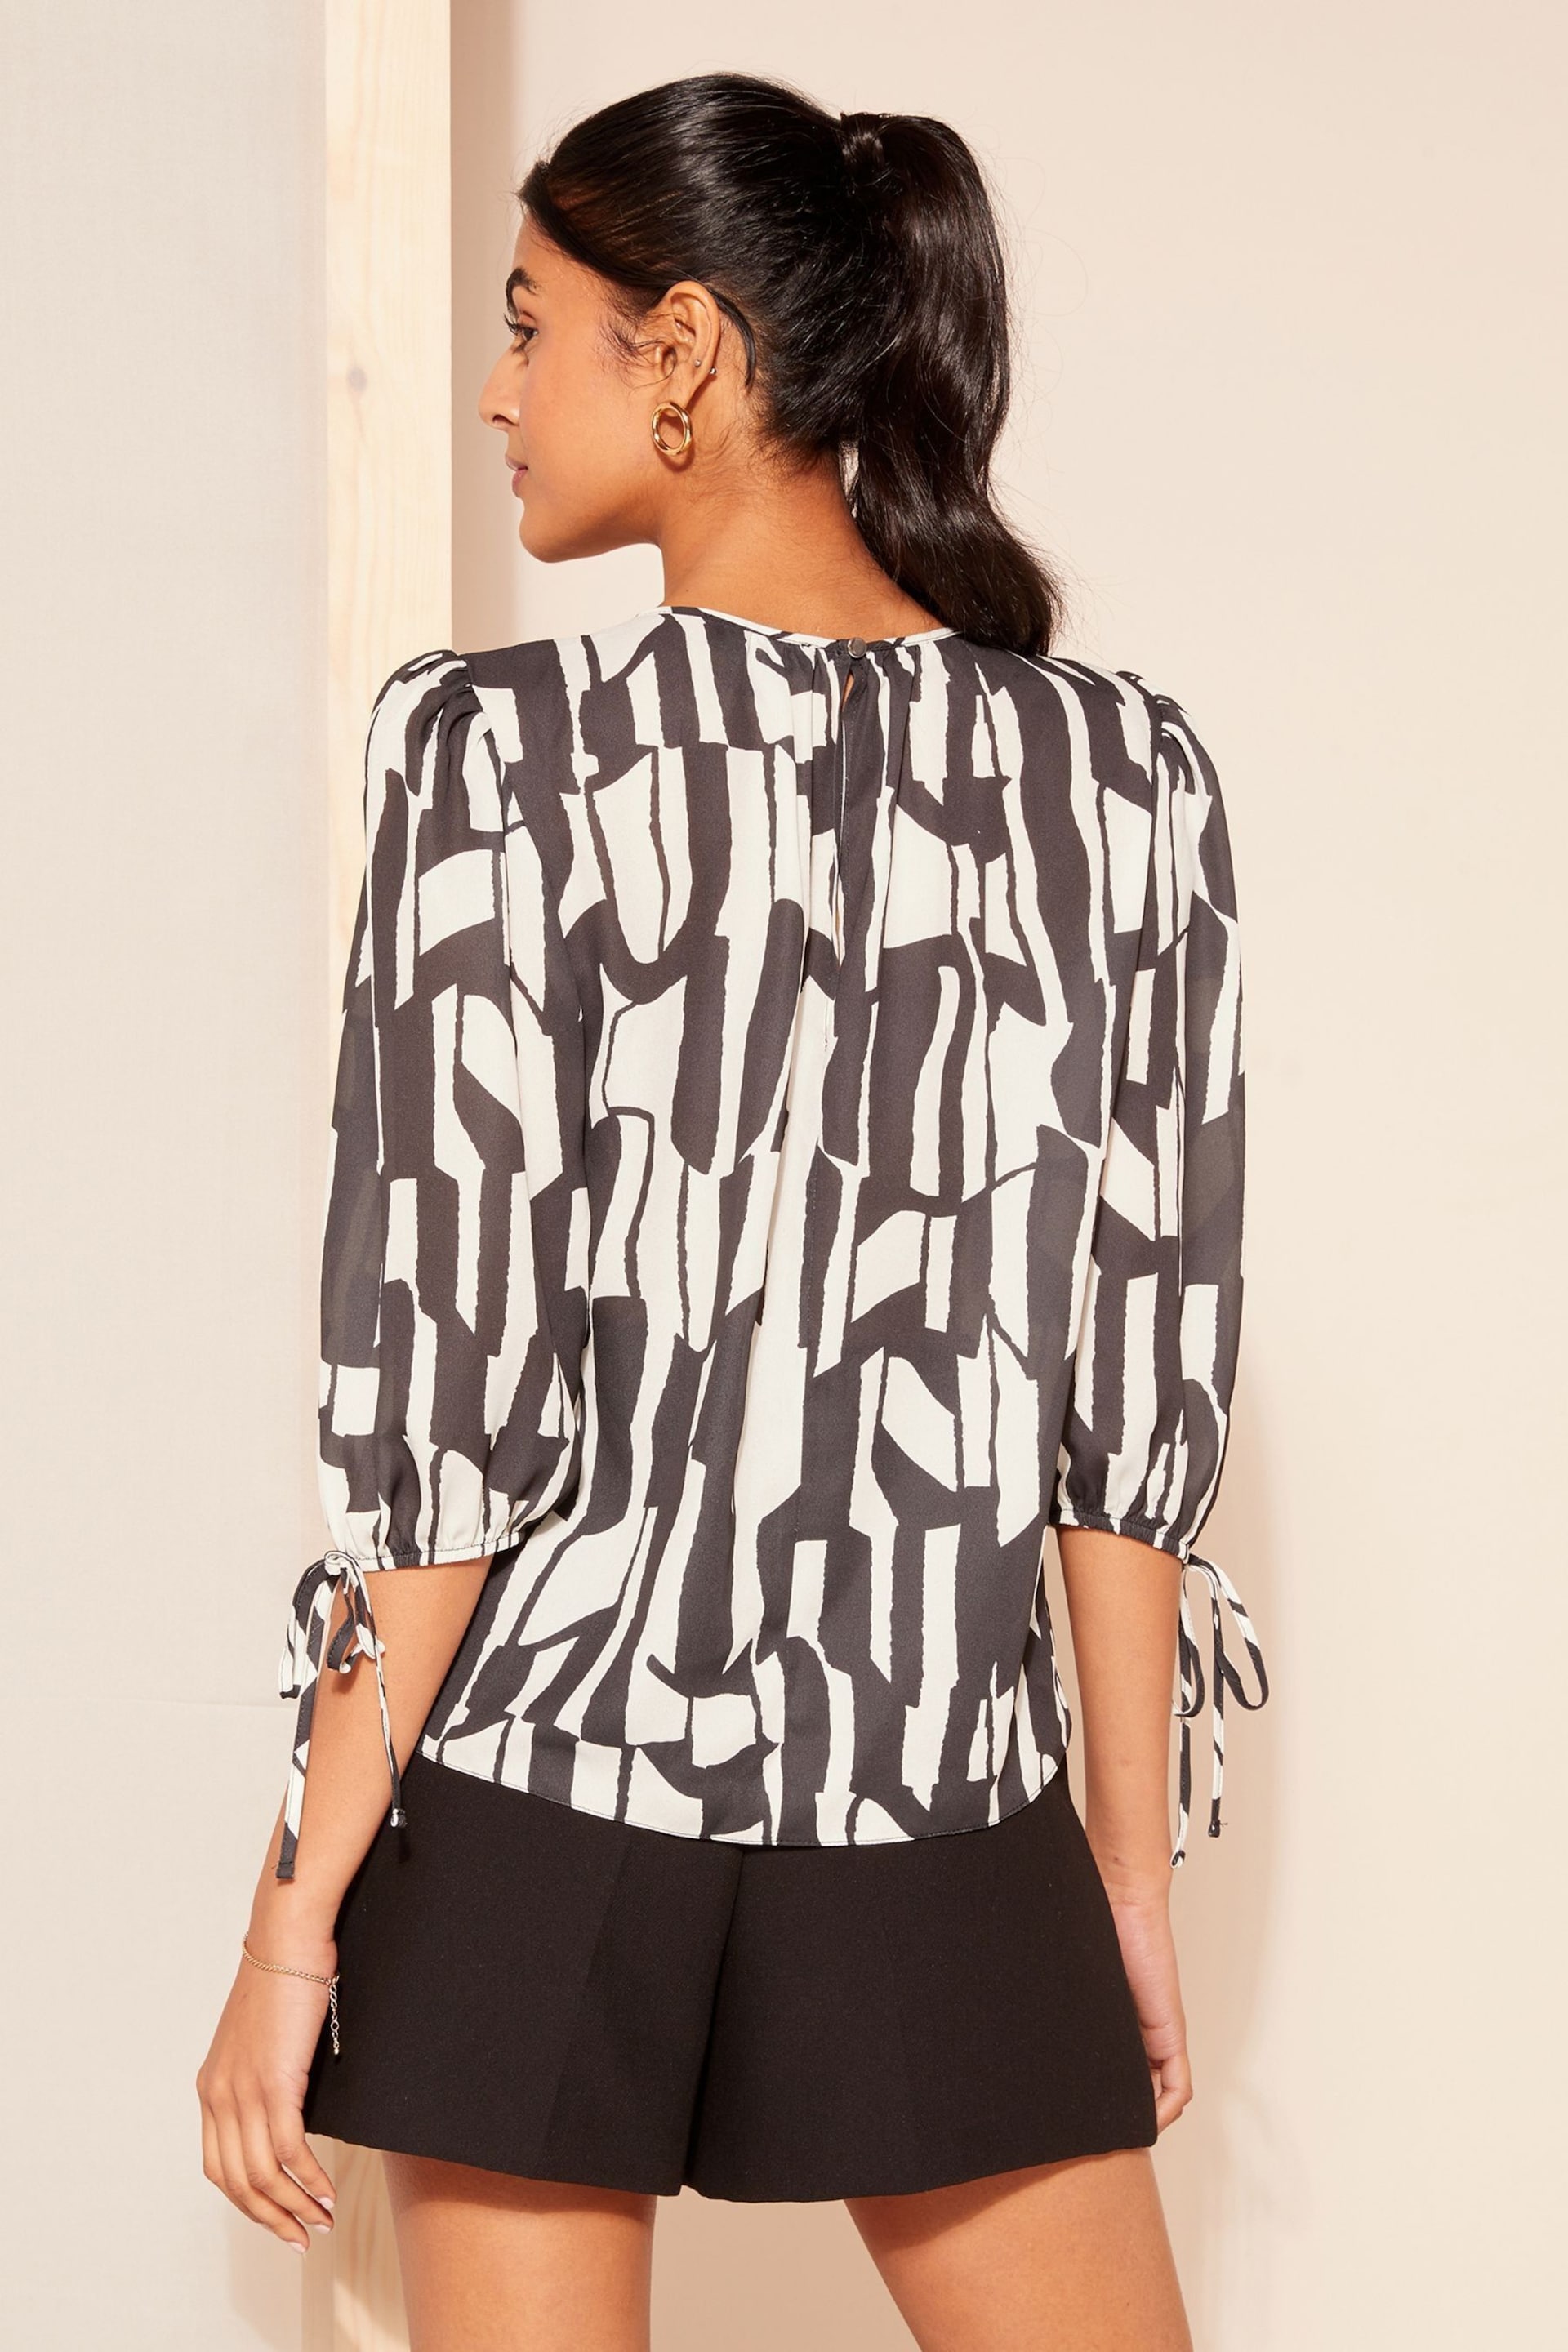 Friends Like These Black/White 3/4 Sleeve Chiffon Tie Cuff Blouse - Image 4 of 4